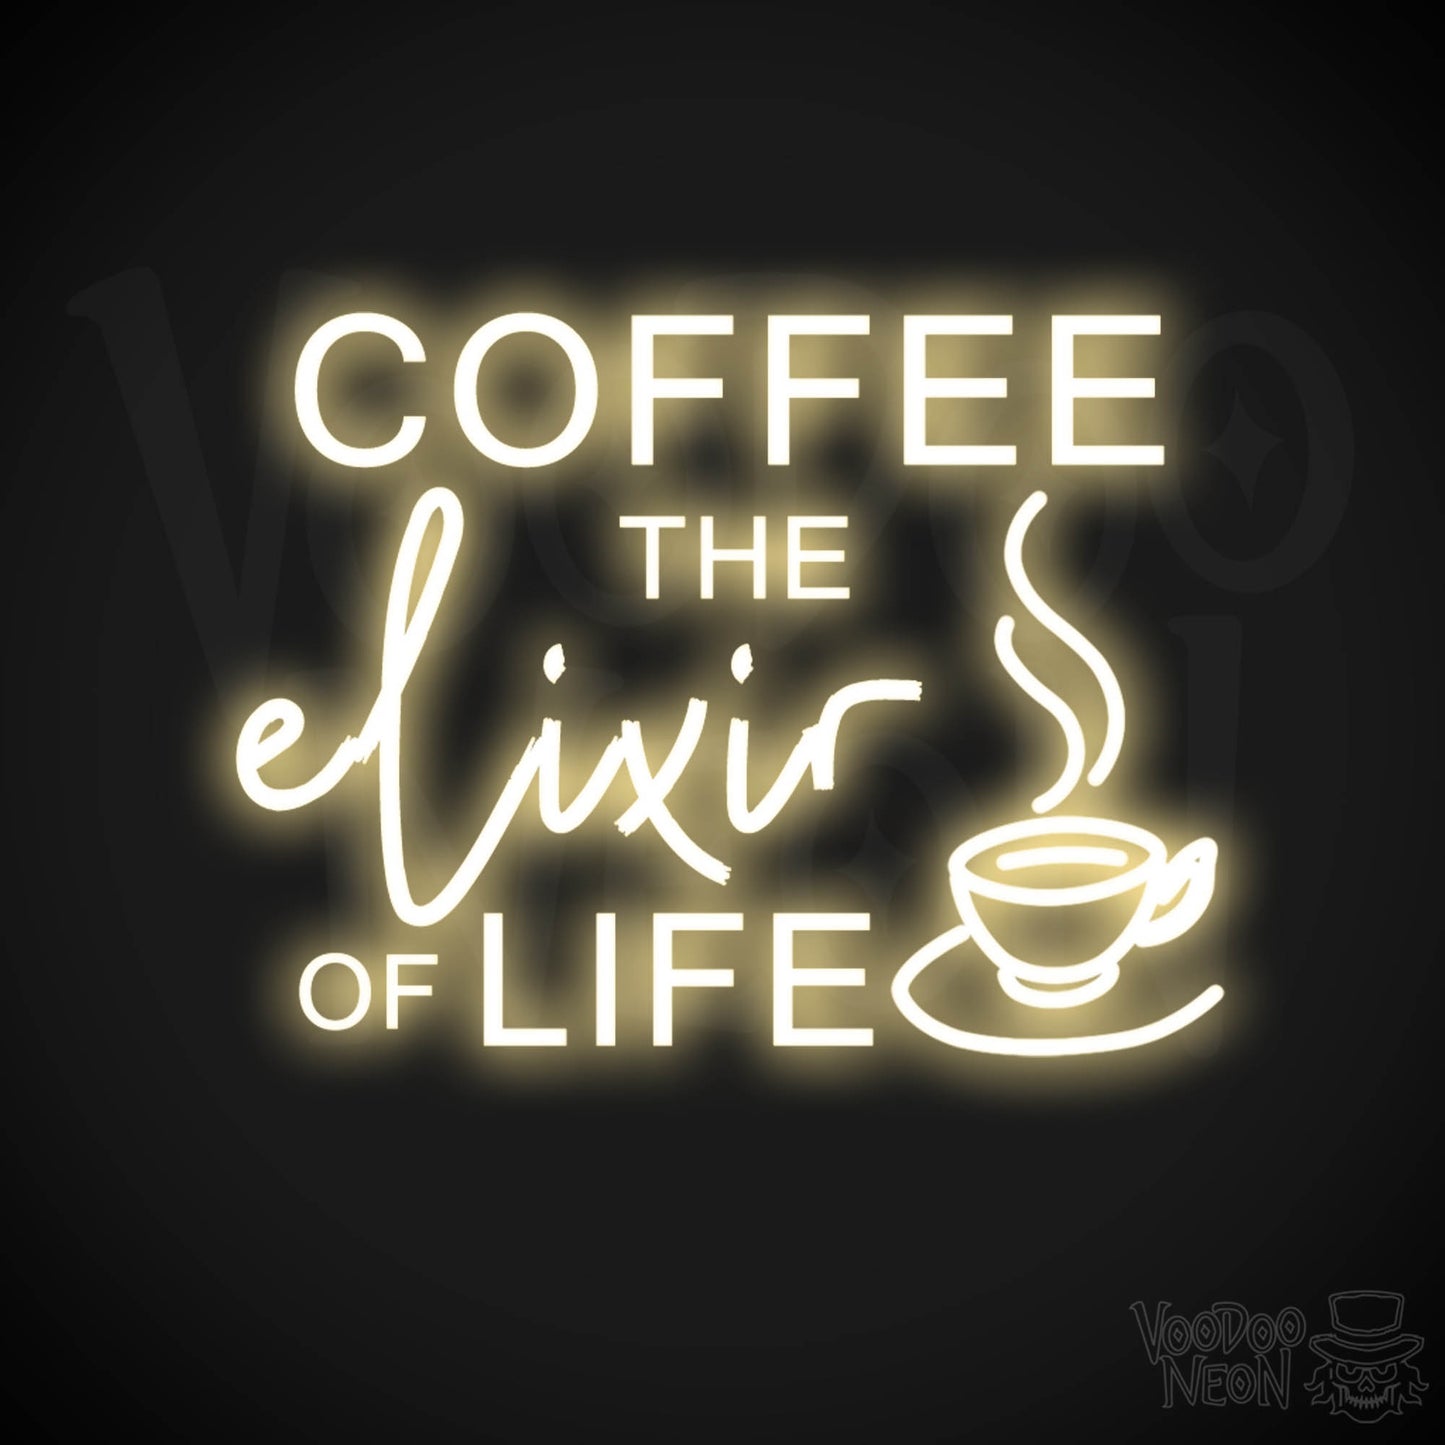 Coffee - The Elixir Of Life Neon Sign - The Elixir Of Life Sign - Color Warm White